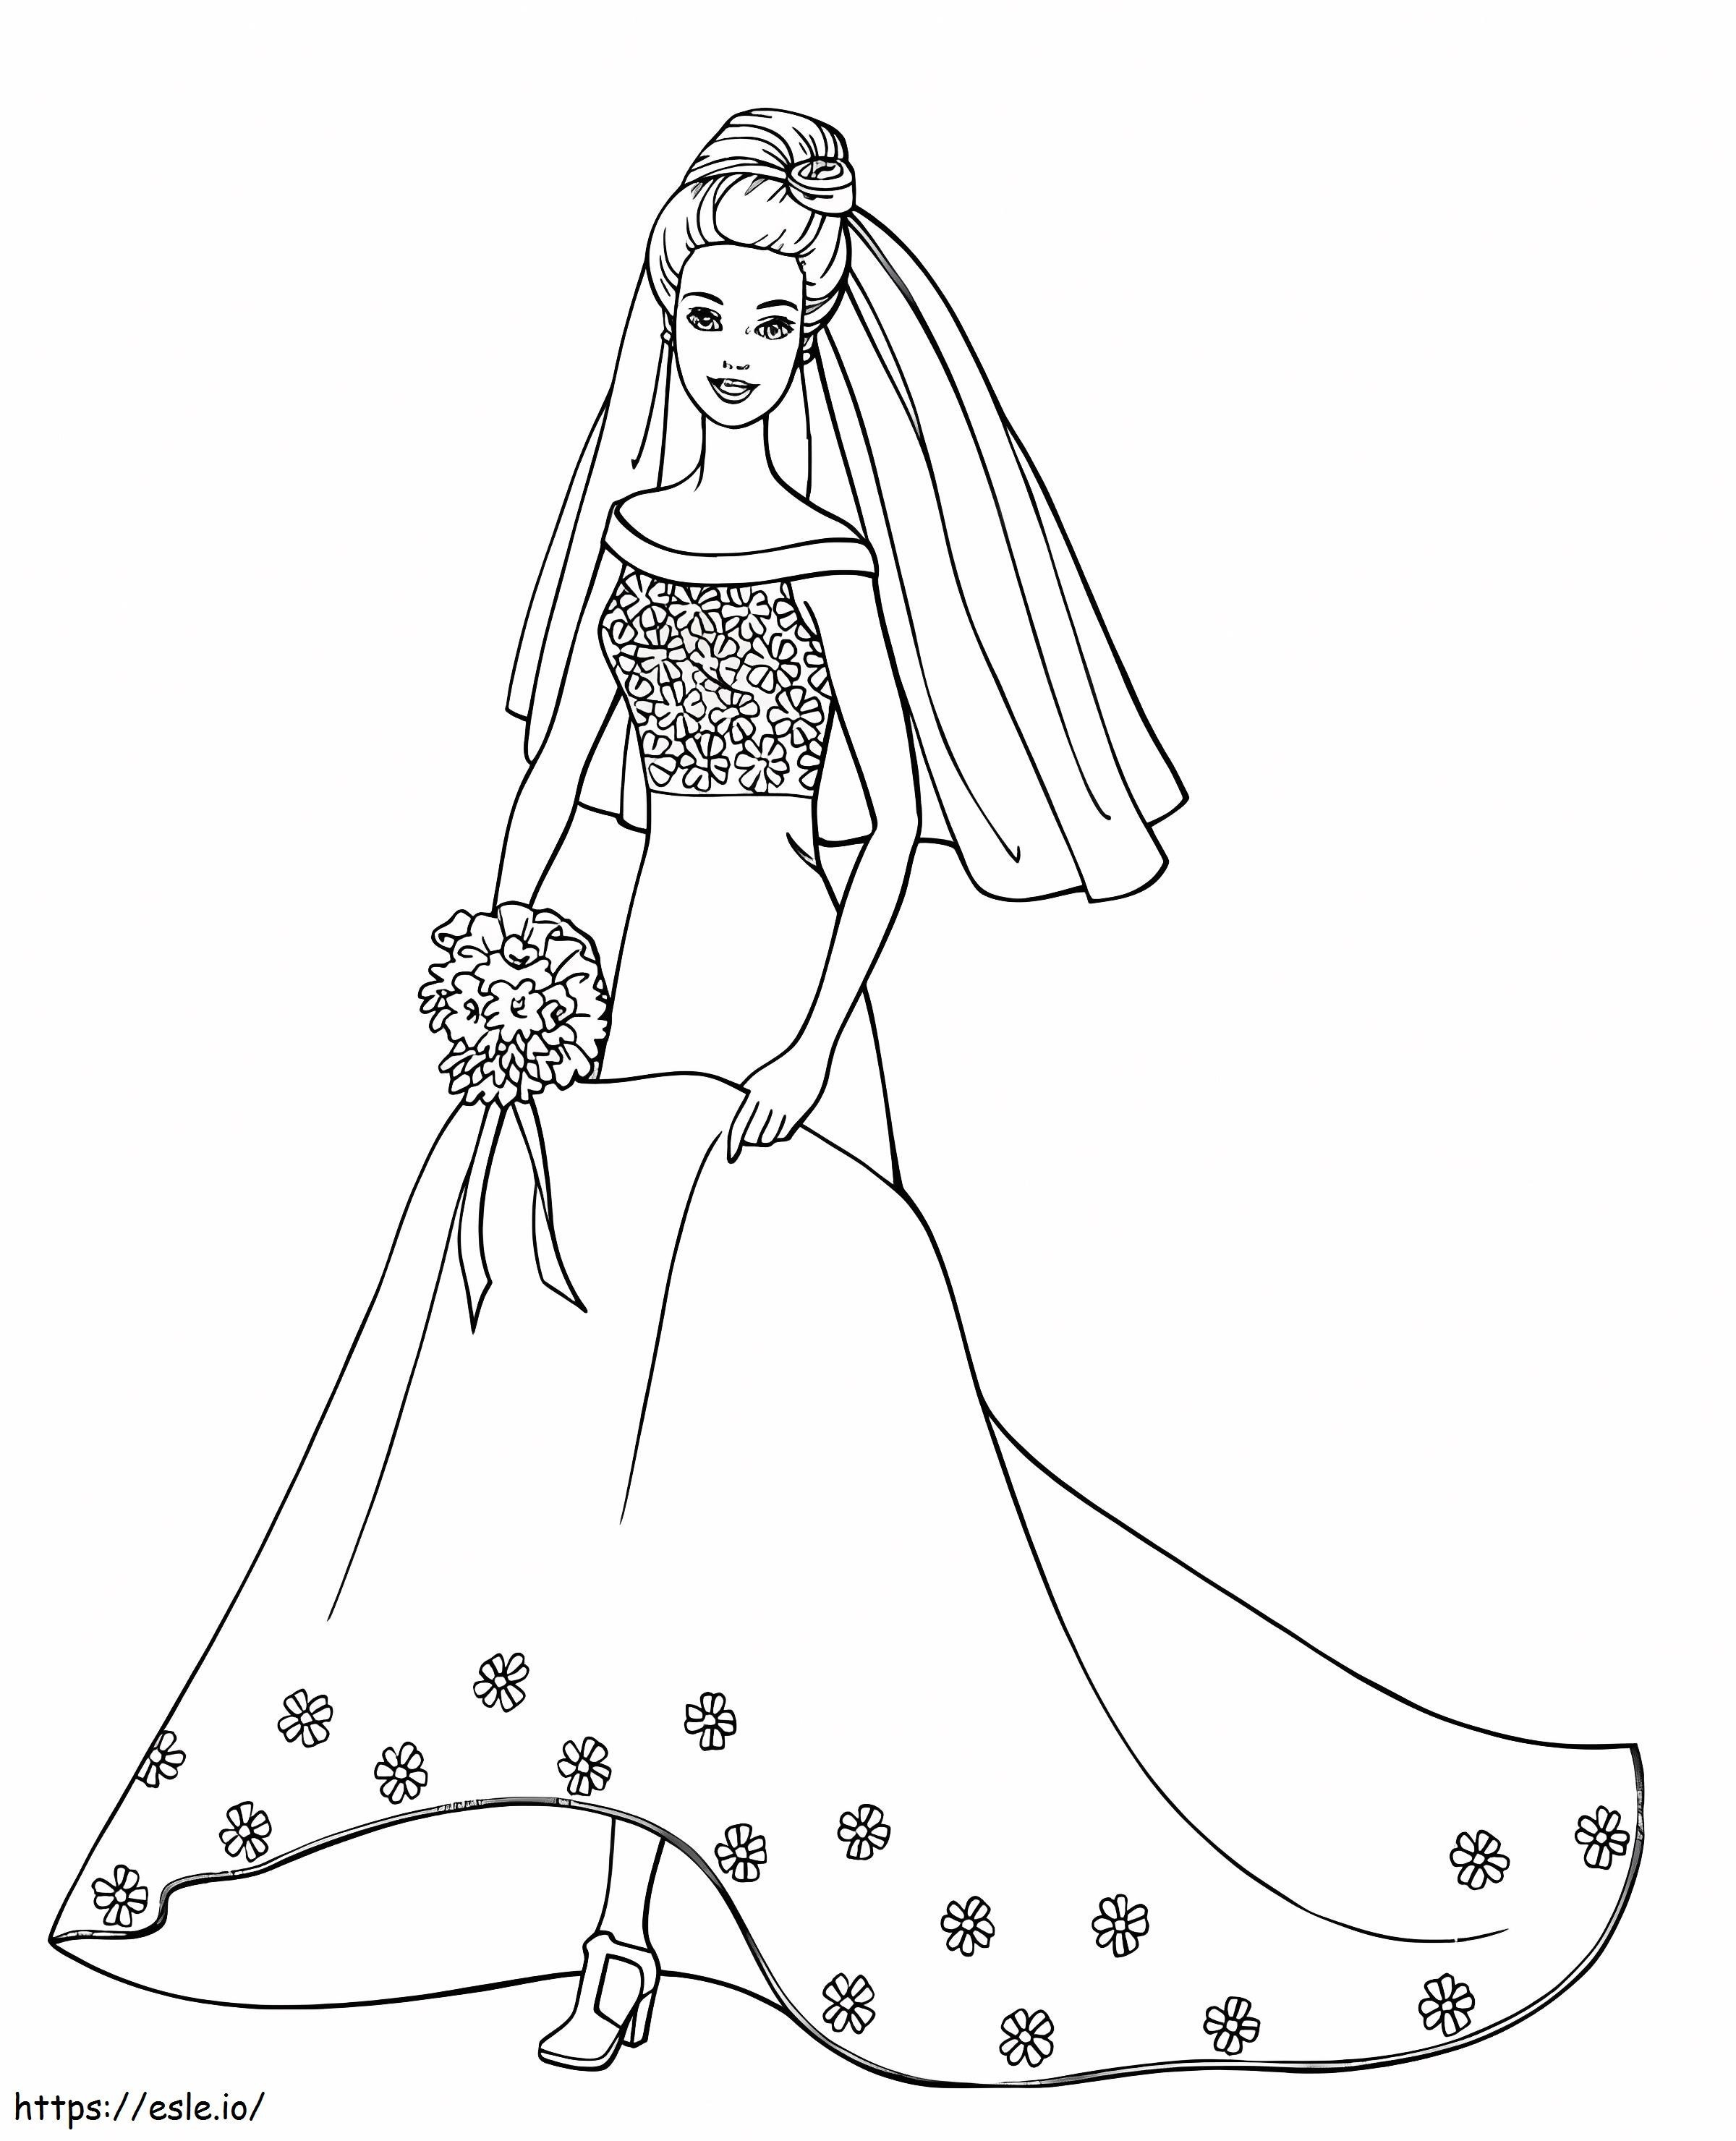 Barbie On Wedding Dress coloring page